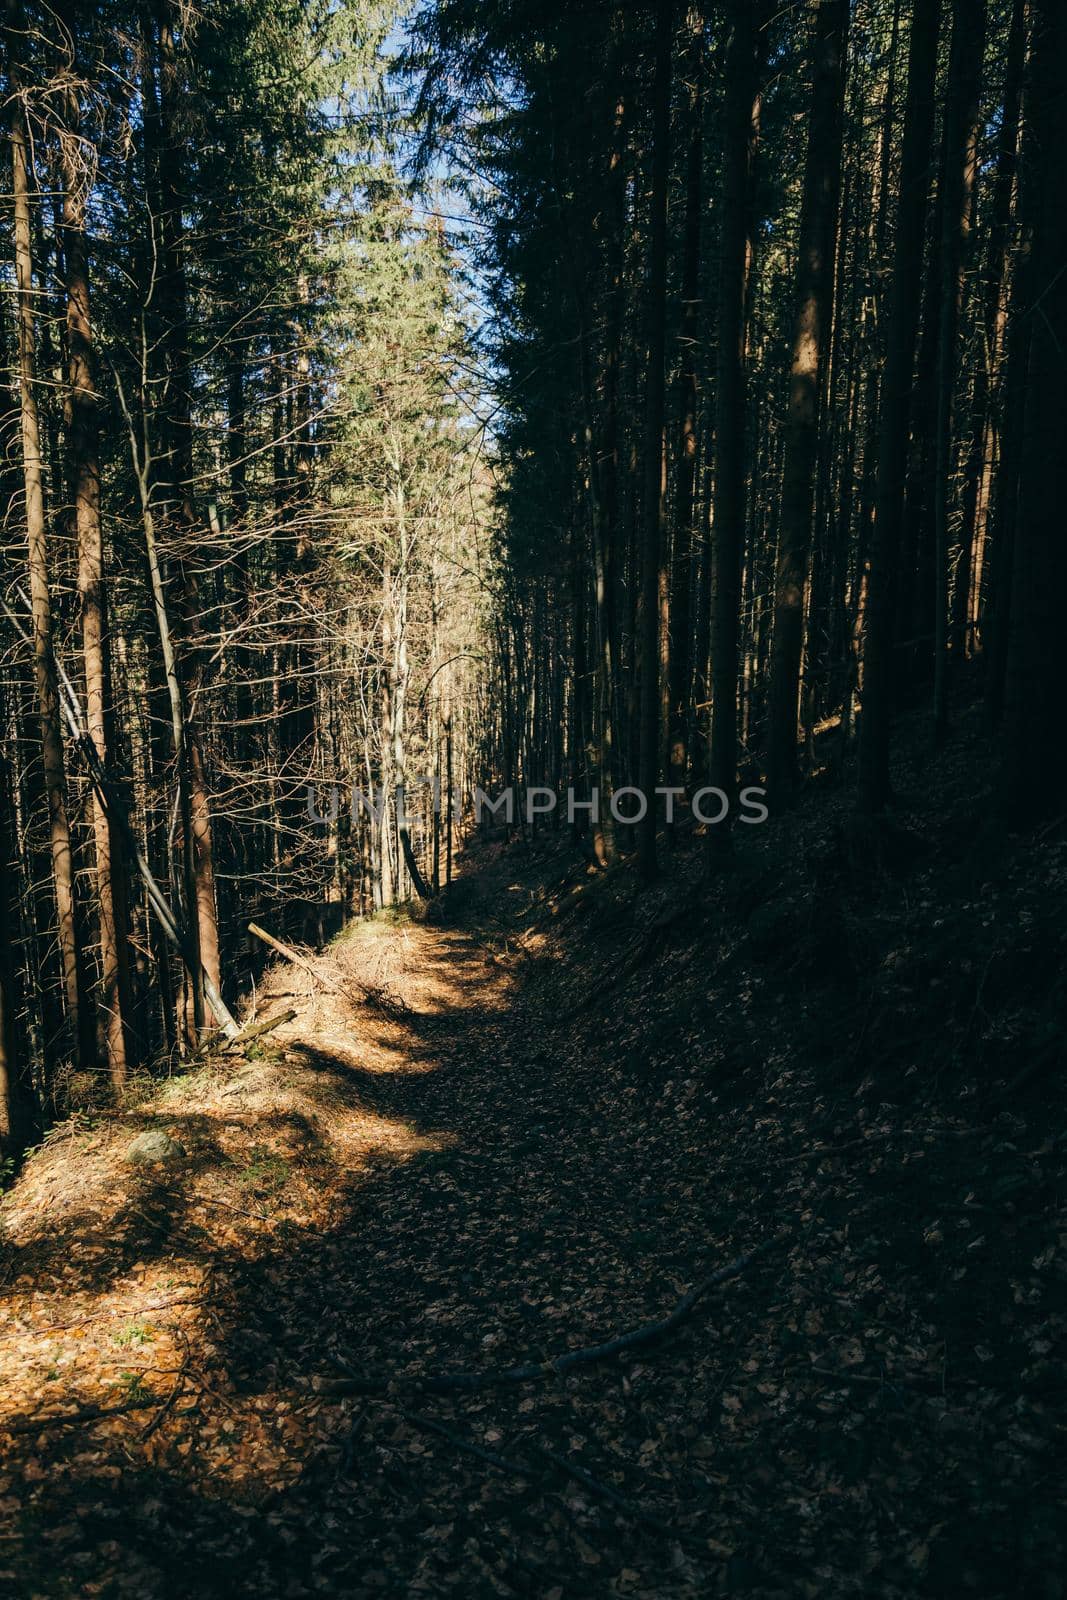 Mountain road with stones and coniferous forest, old road. High quality photo